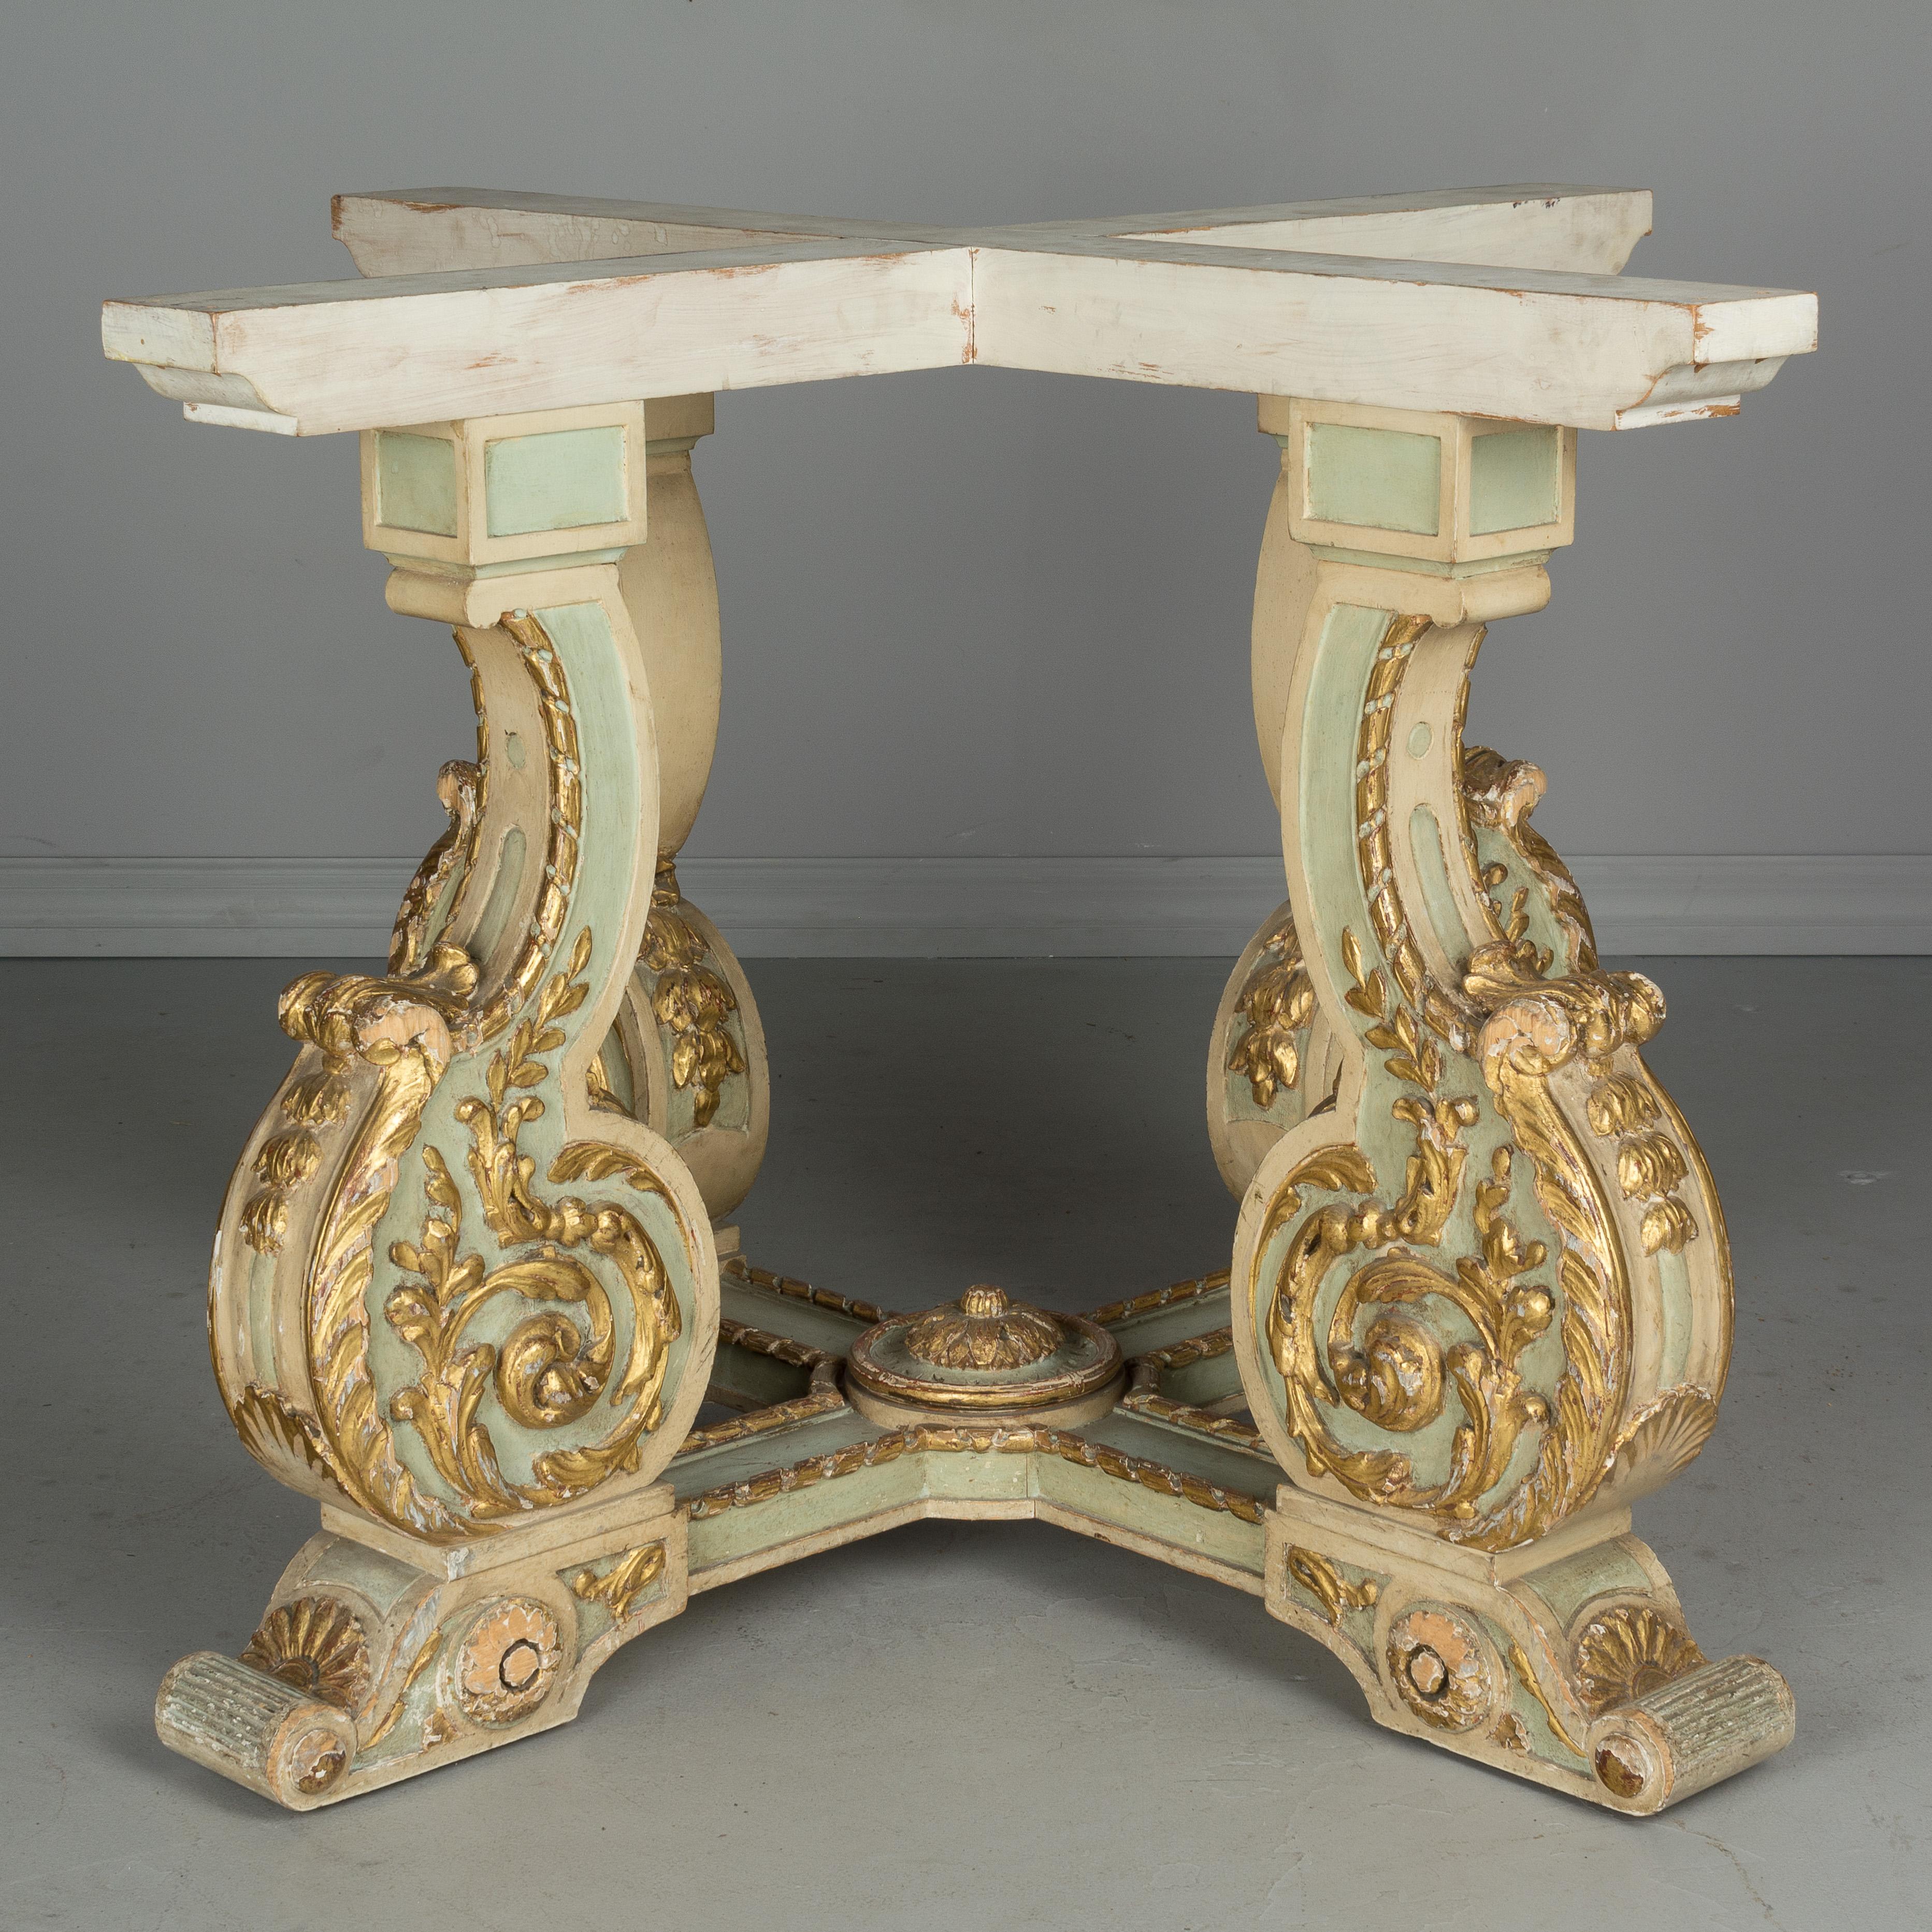 Midcentury French Chinoiserie Guéridon or Center Table 5